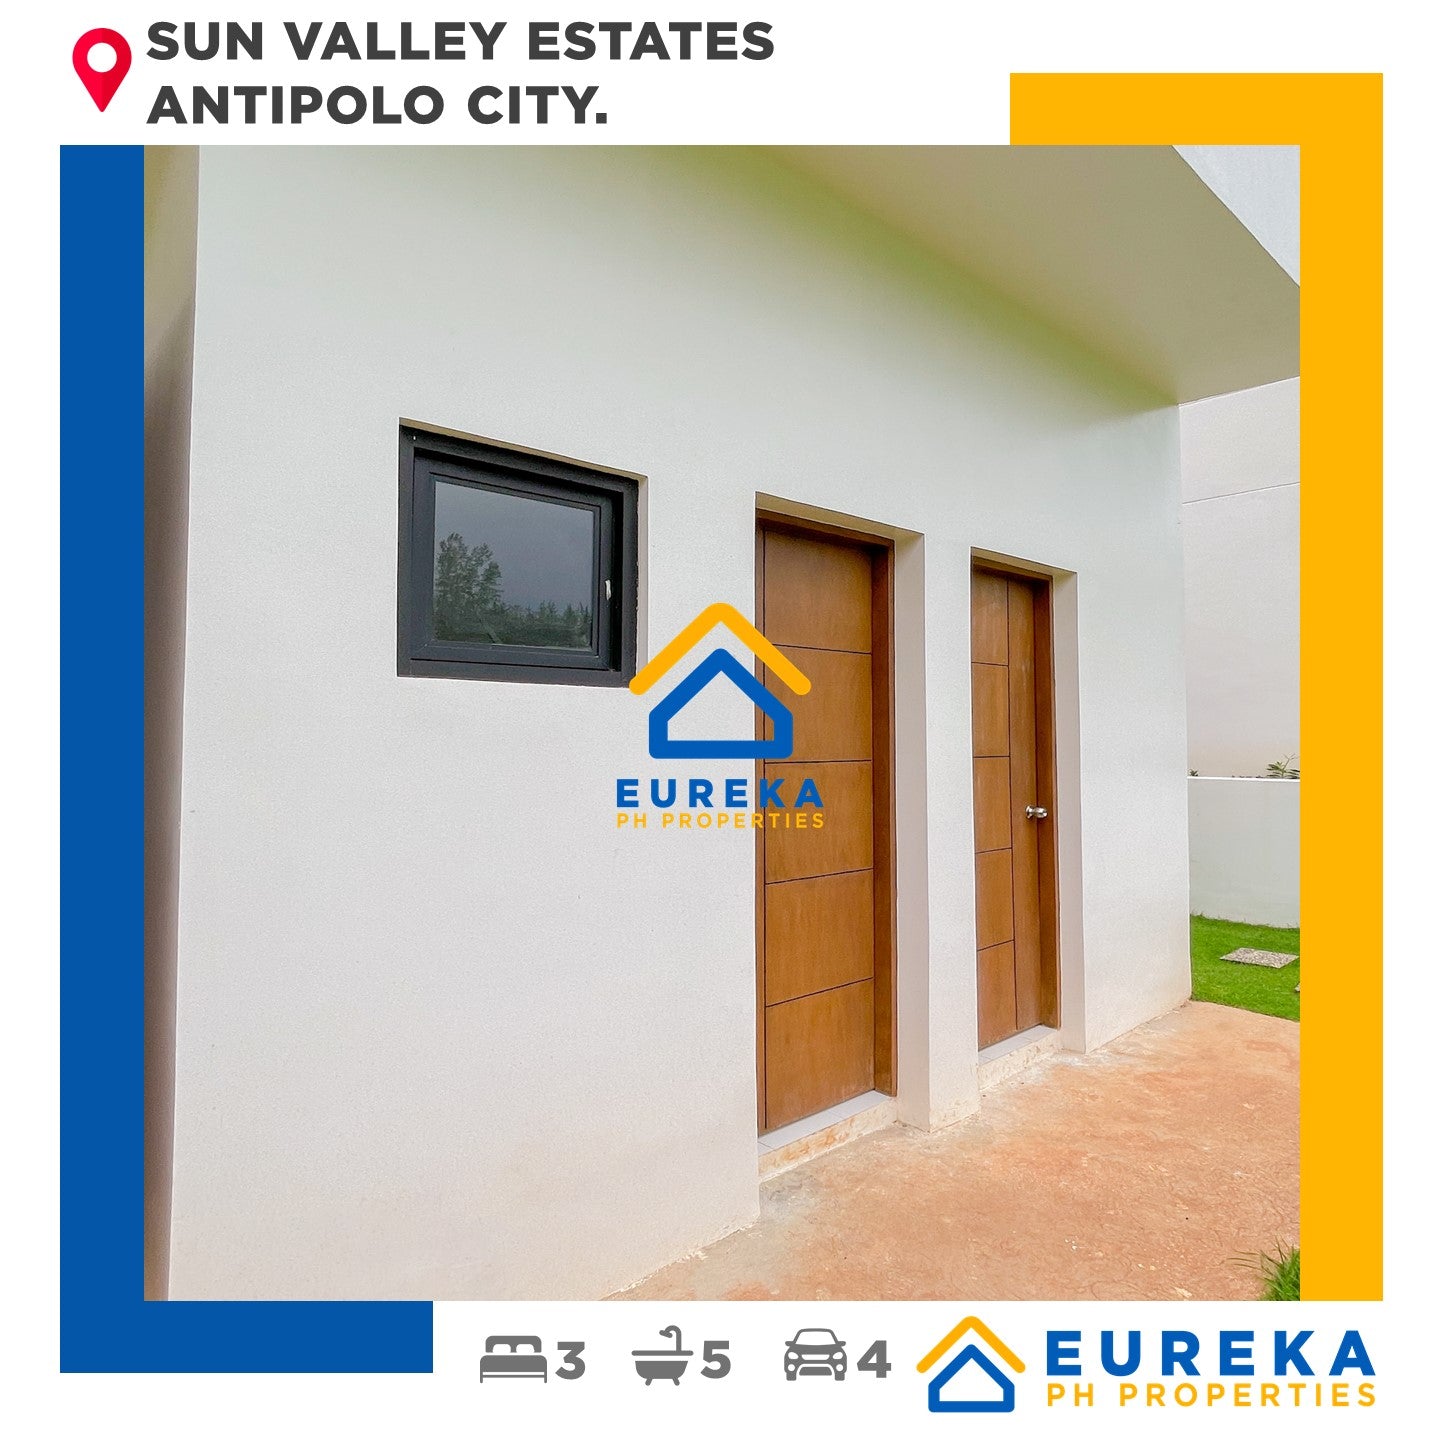 Brand new house and lot in Sun Valley Estates, Anti[polo City.